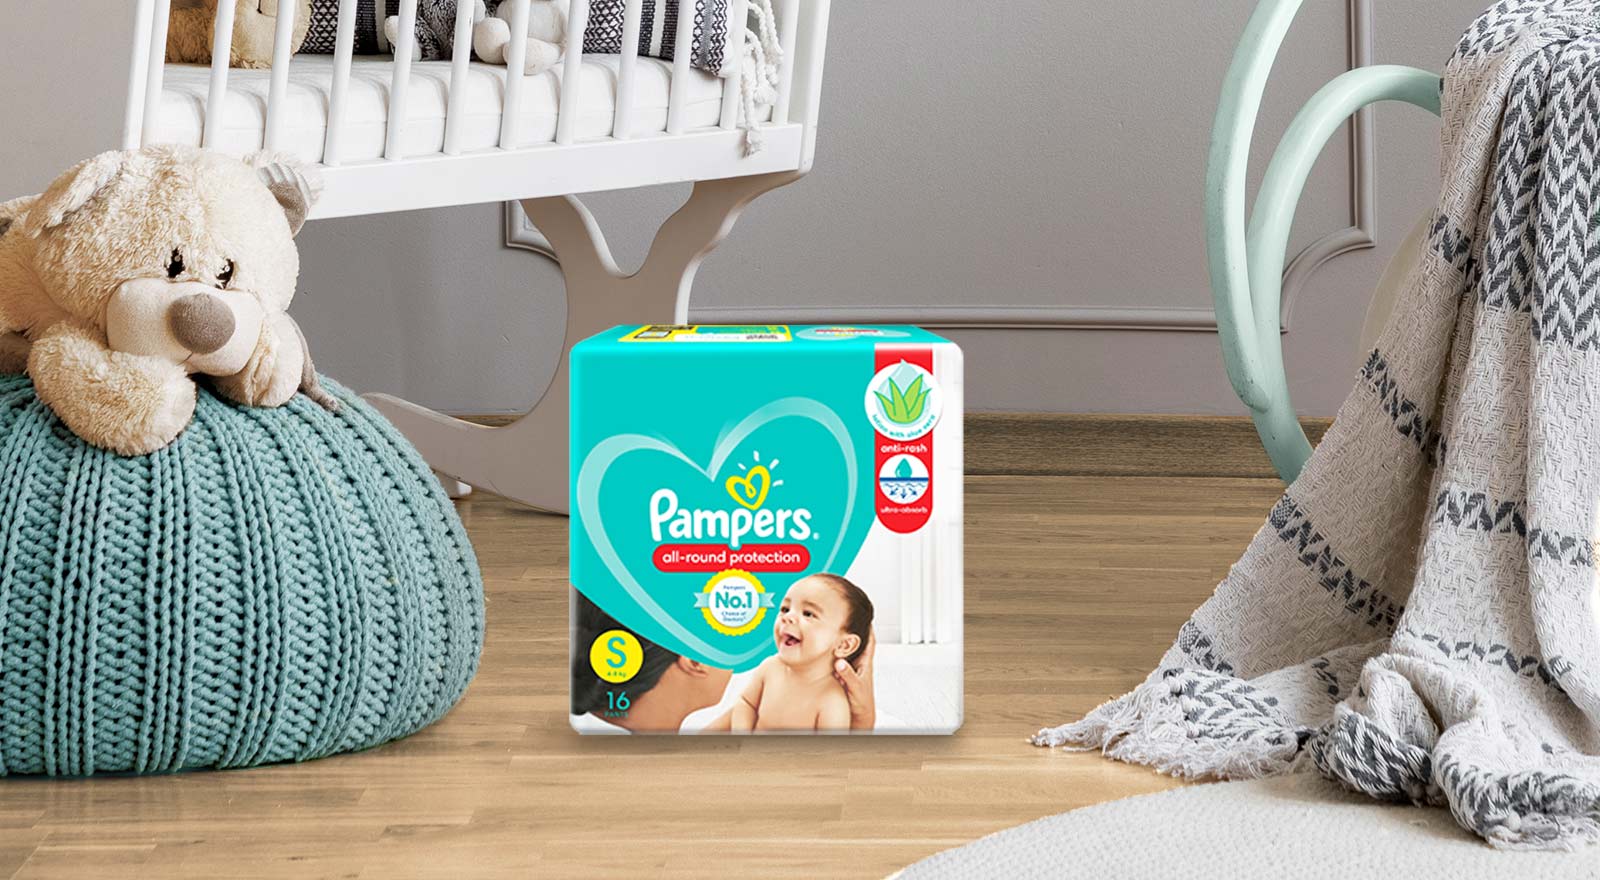 Pampers Premium Care Pants, Extra Large size baby diapers (XL), 36 Count,  Softest ever Pampers pants Online in India, Buy at Best Price from  Firstcry.com - 2163905